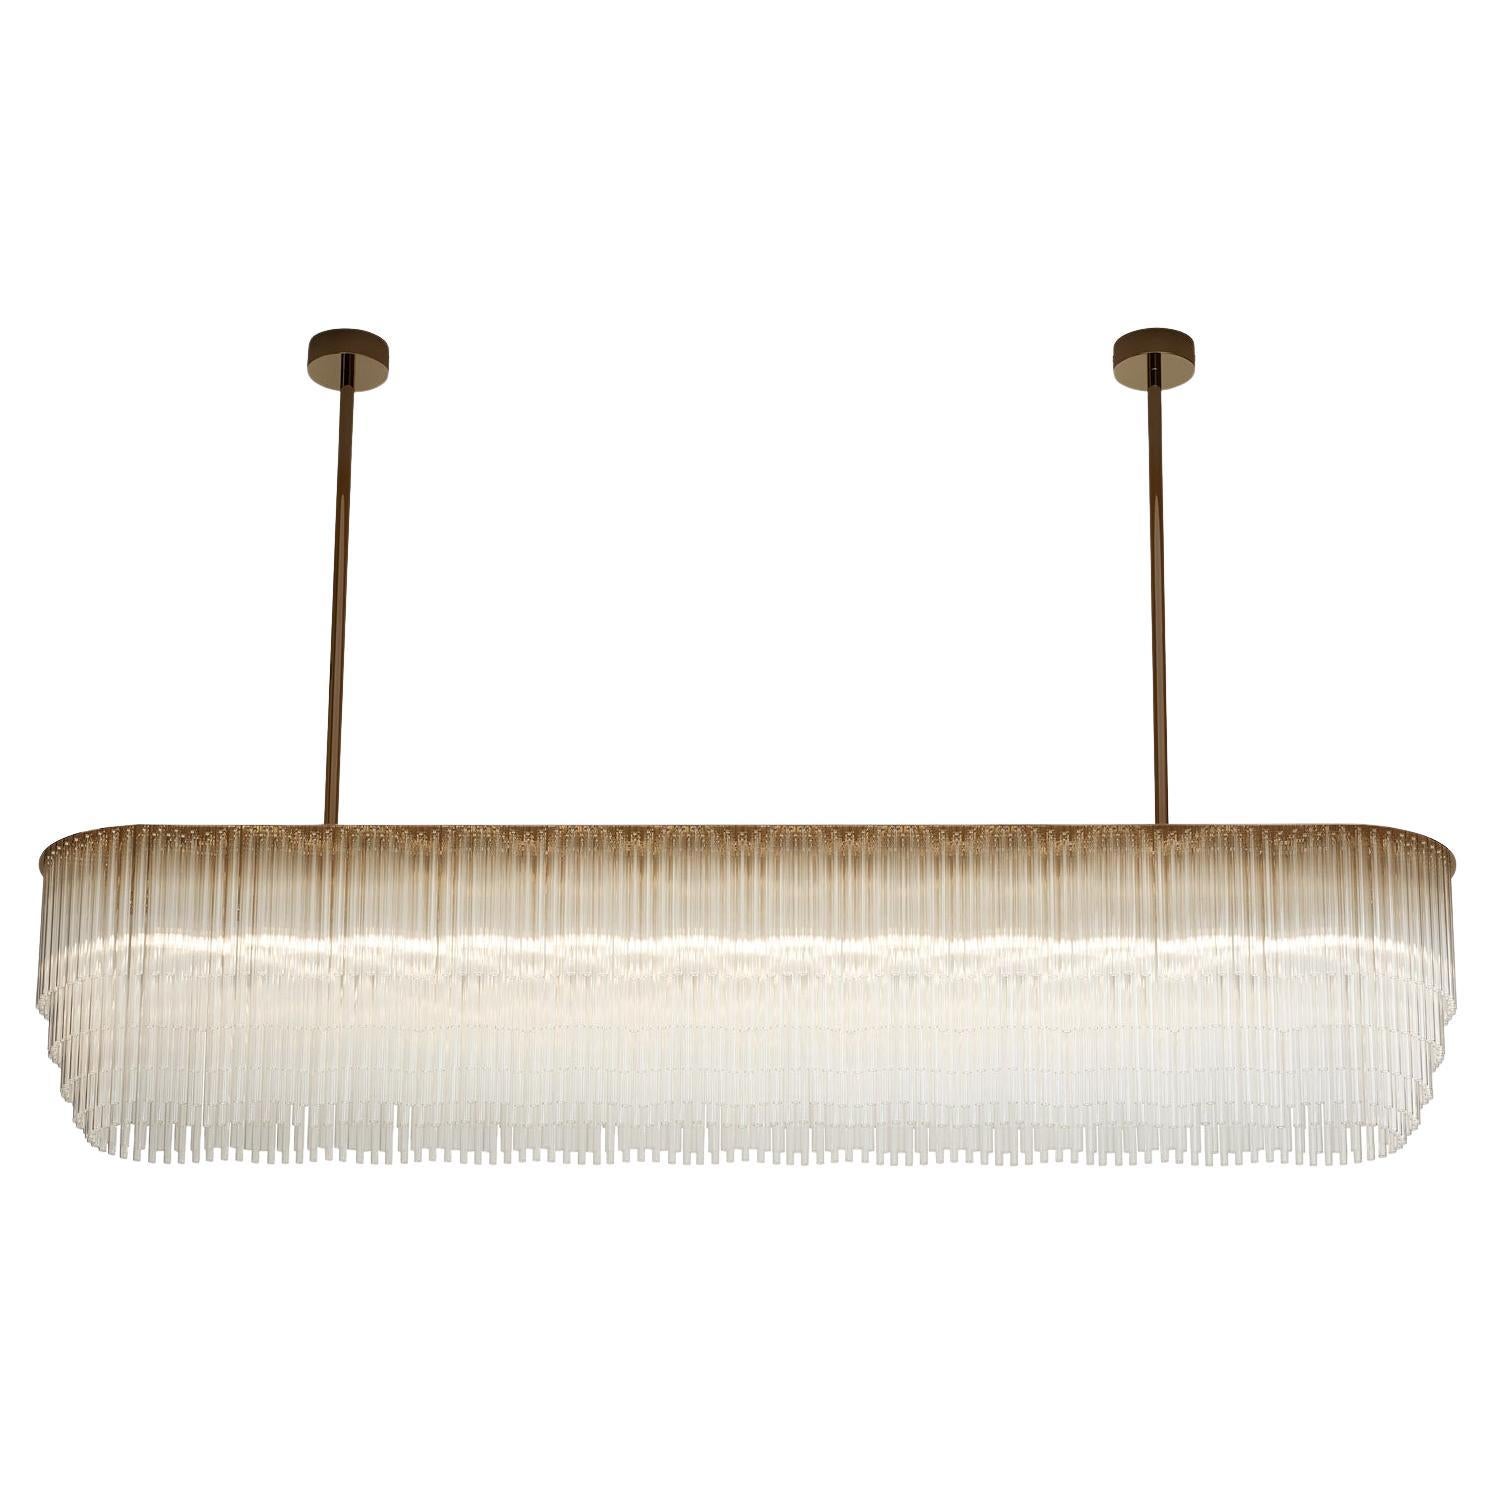 Linear Chandelier 1261mm / 25.75" in Brass-based Bronze and Tiered Glass Profile